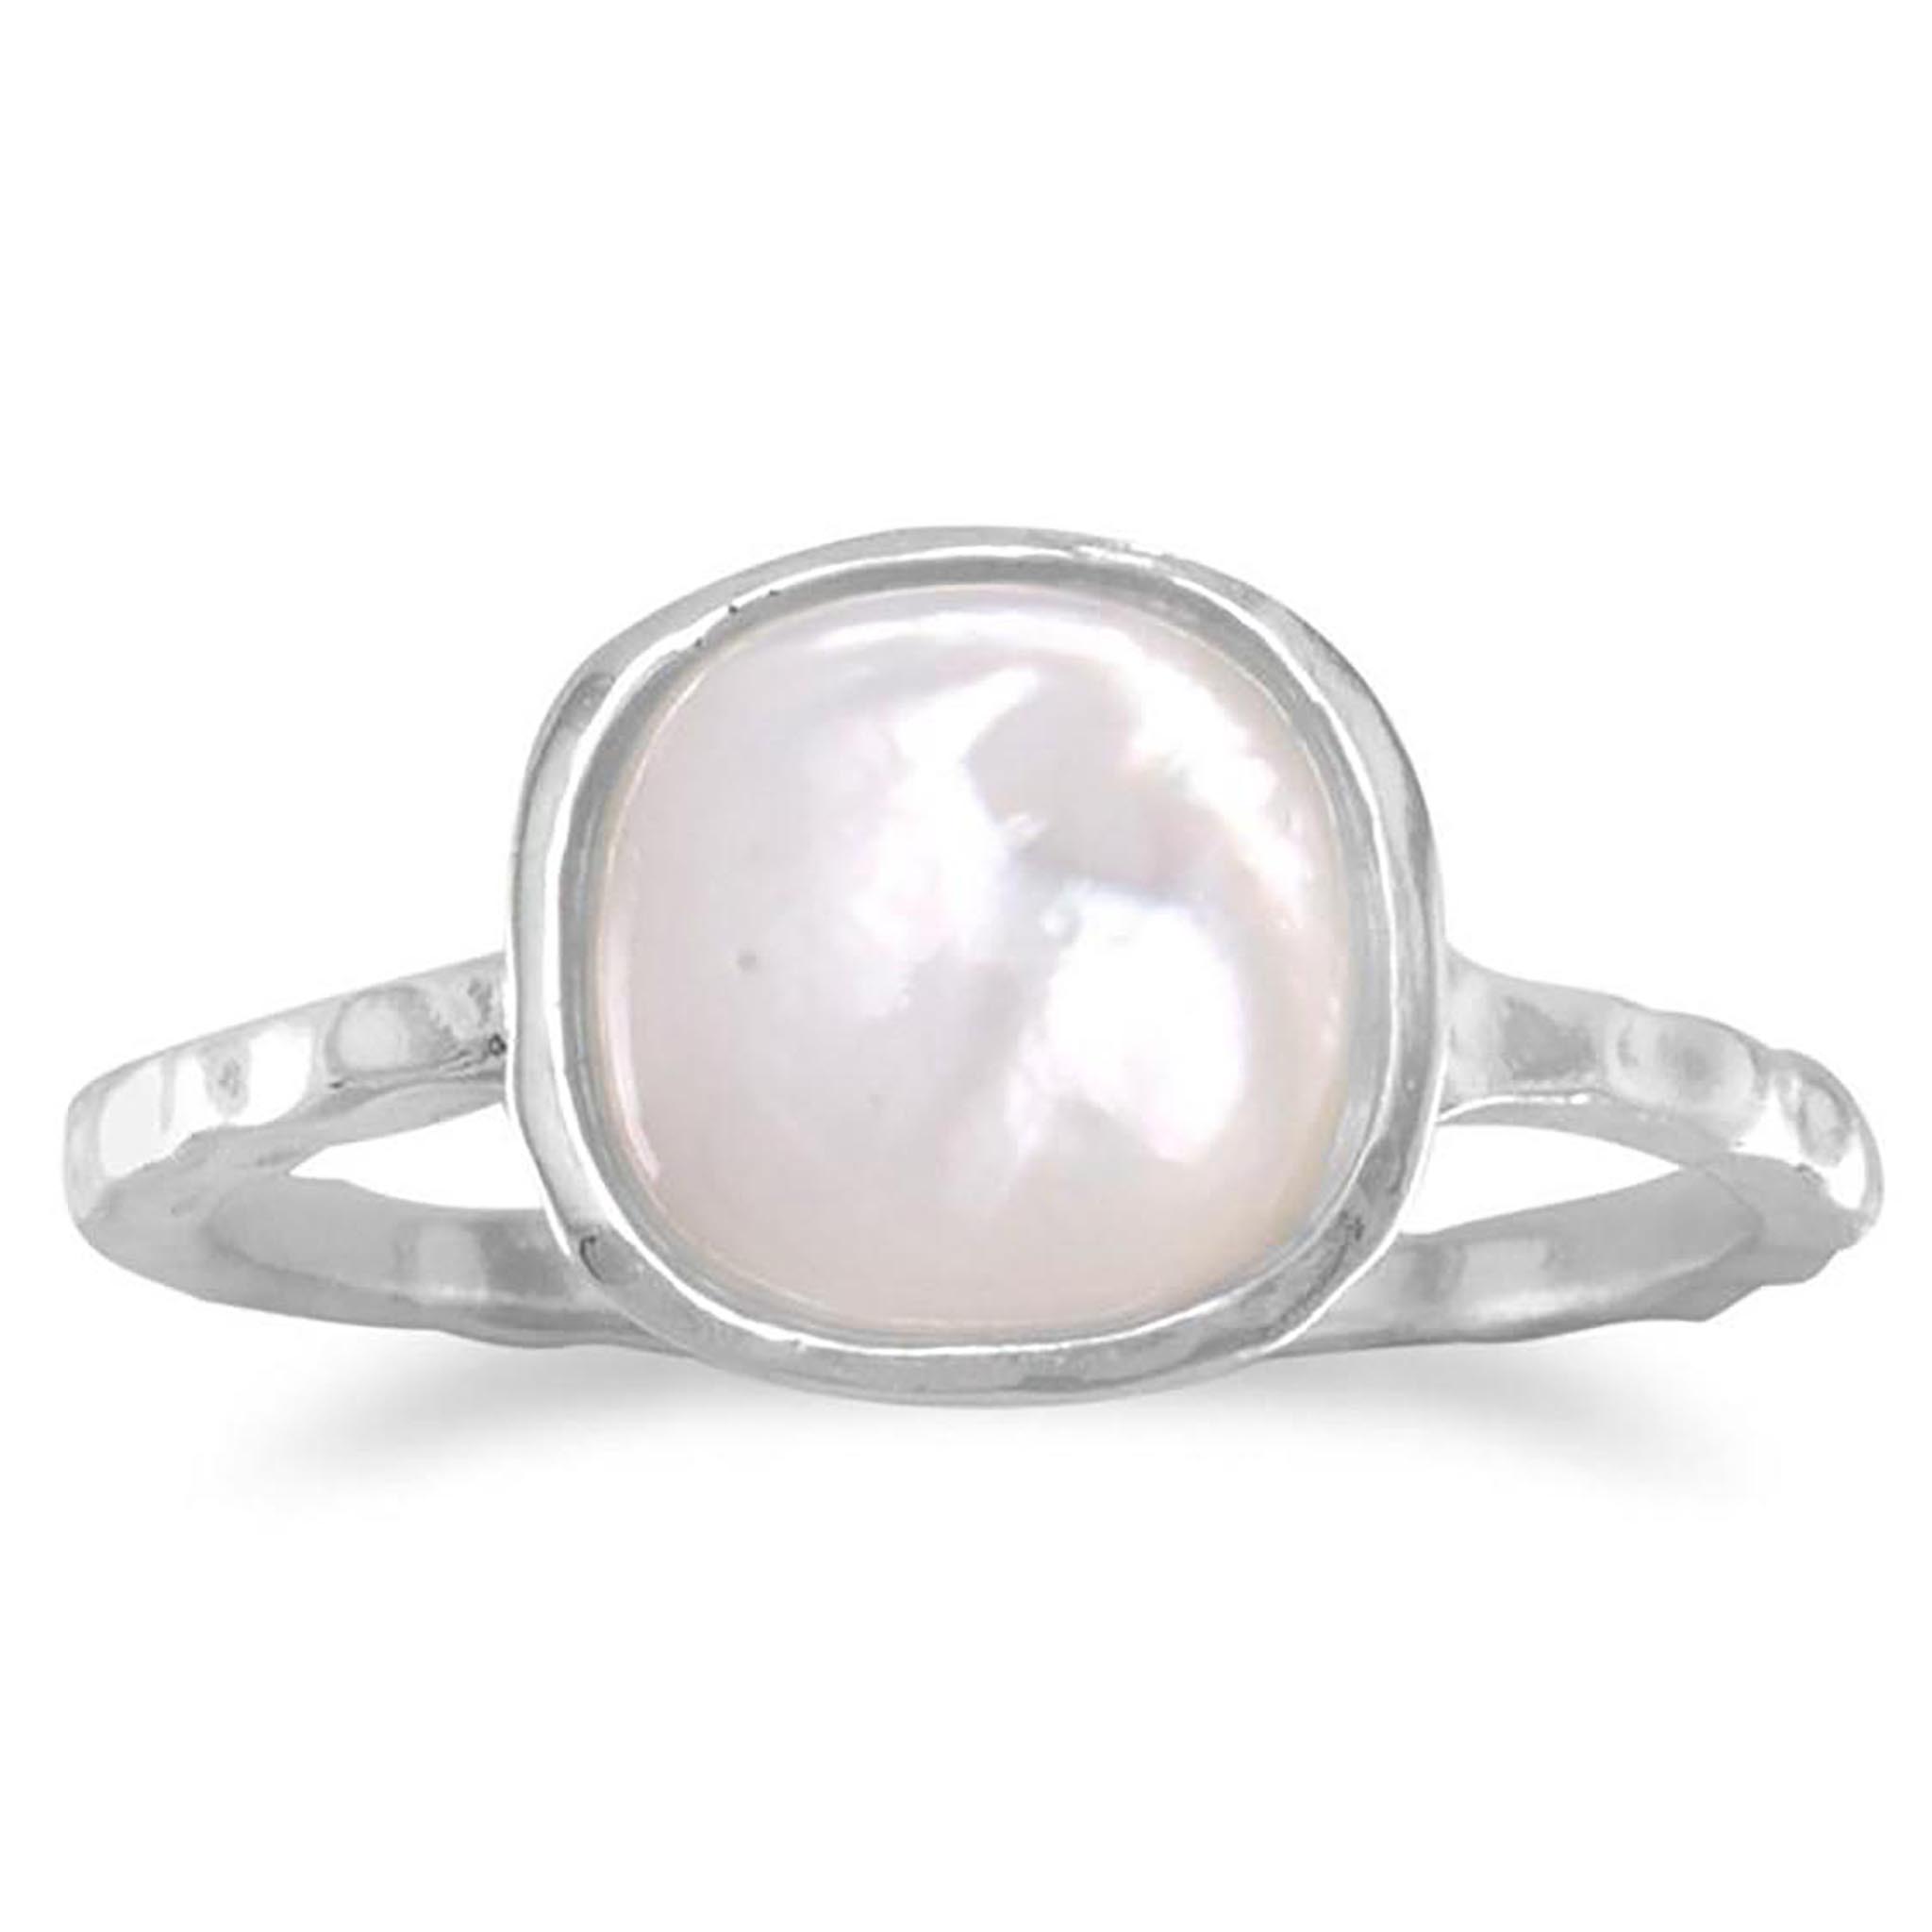 Textured Mother of Pearl Ring